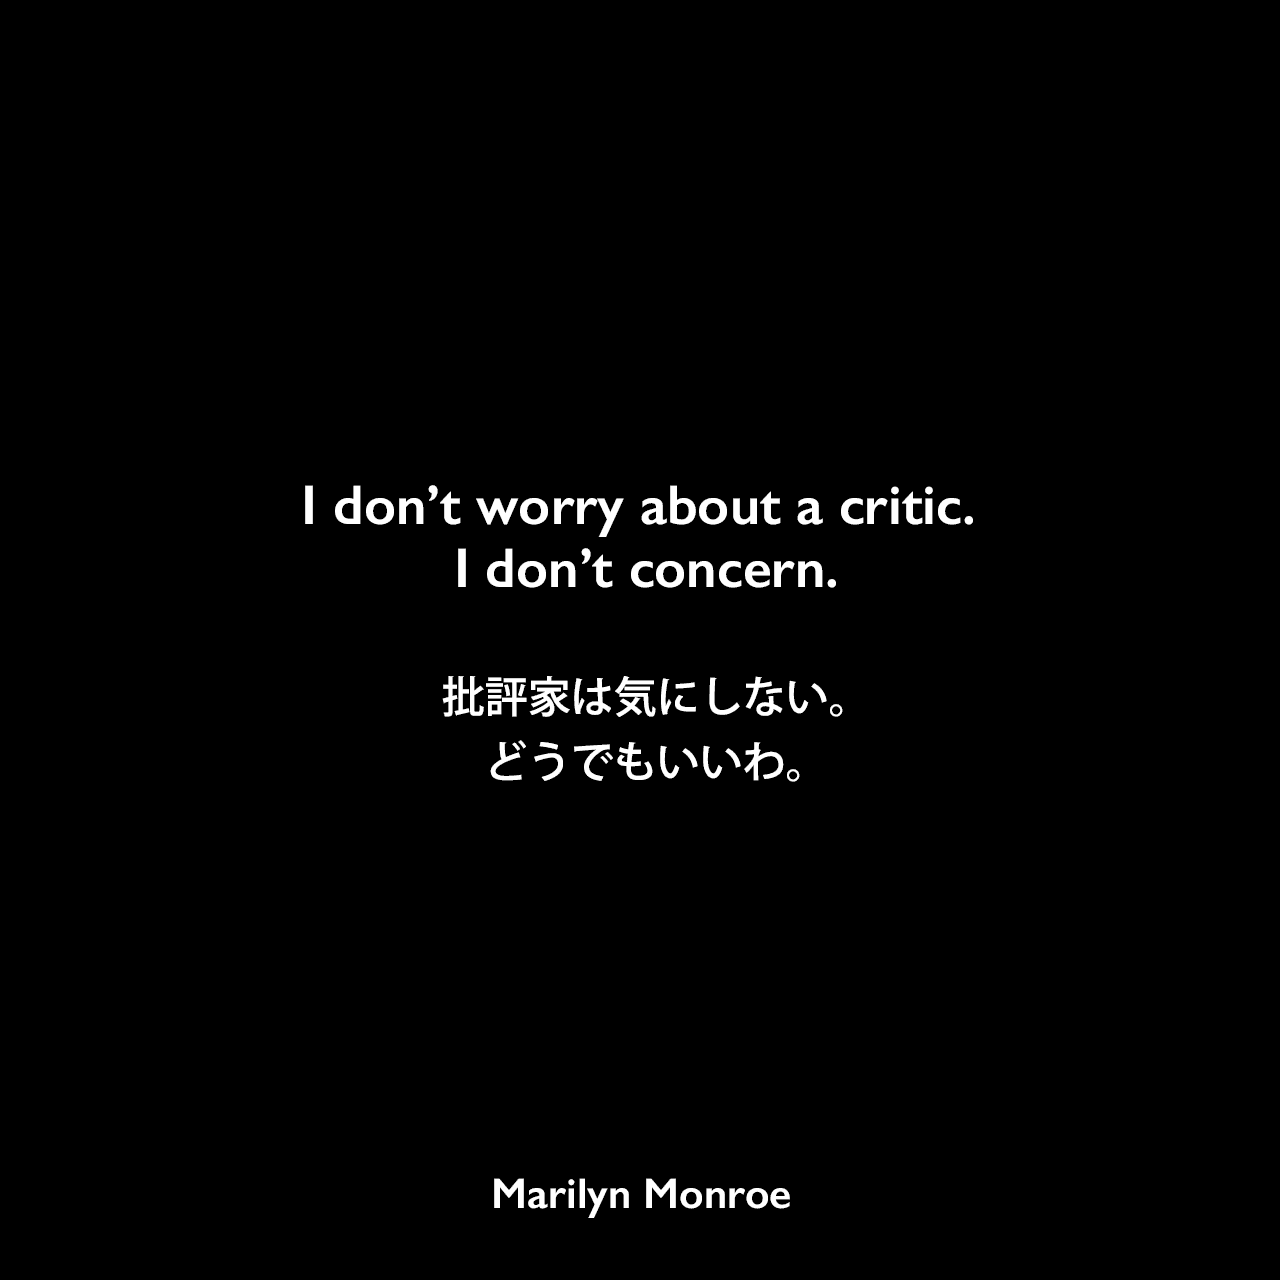 I don’t worry about a critic. I don’t concern.批評家は気にしない。どうでもいいわ。Marilyn Monroe